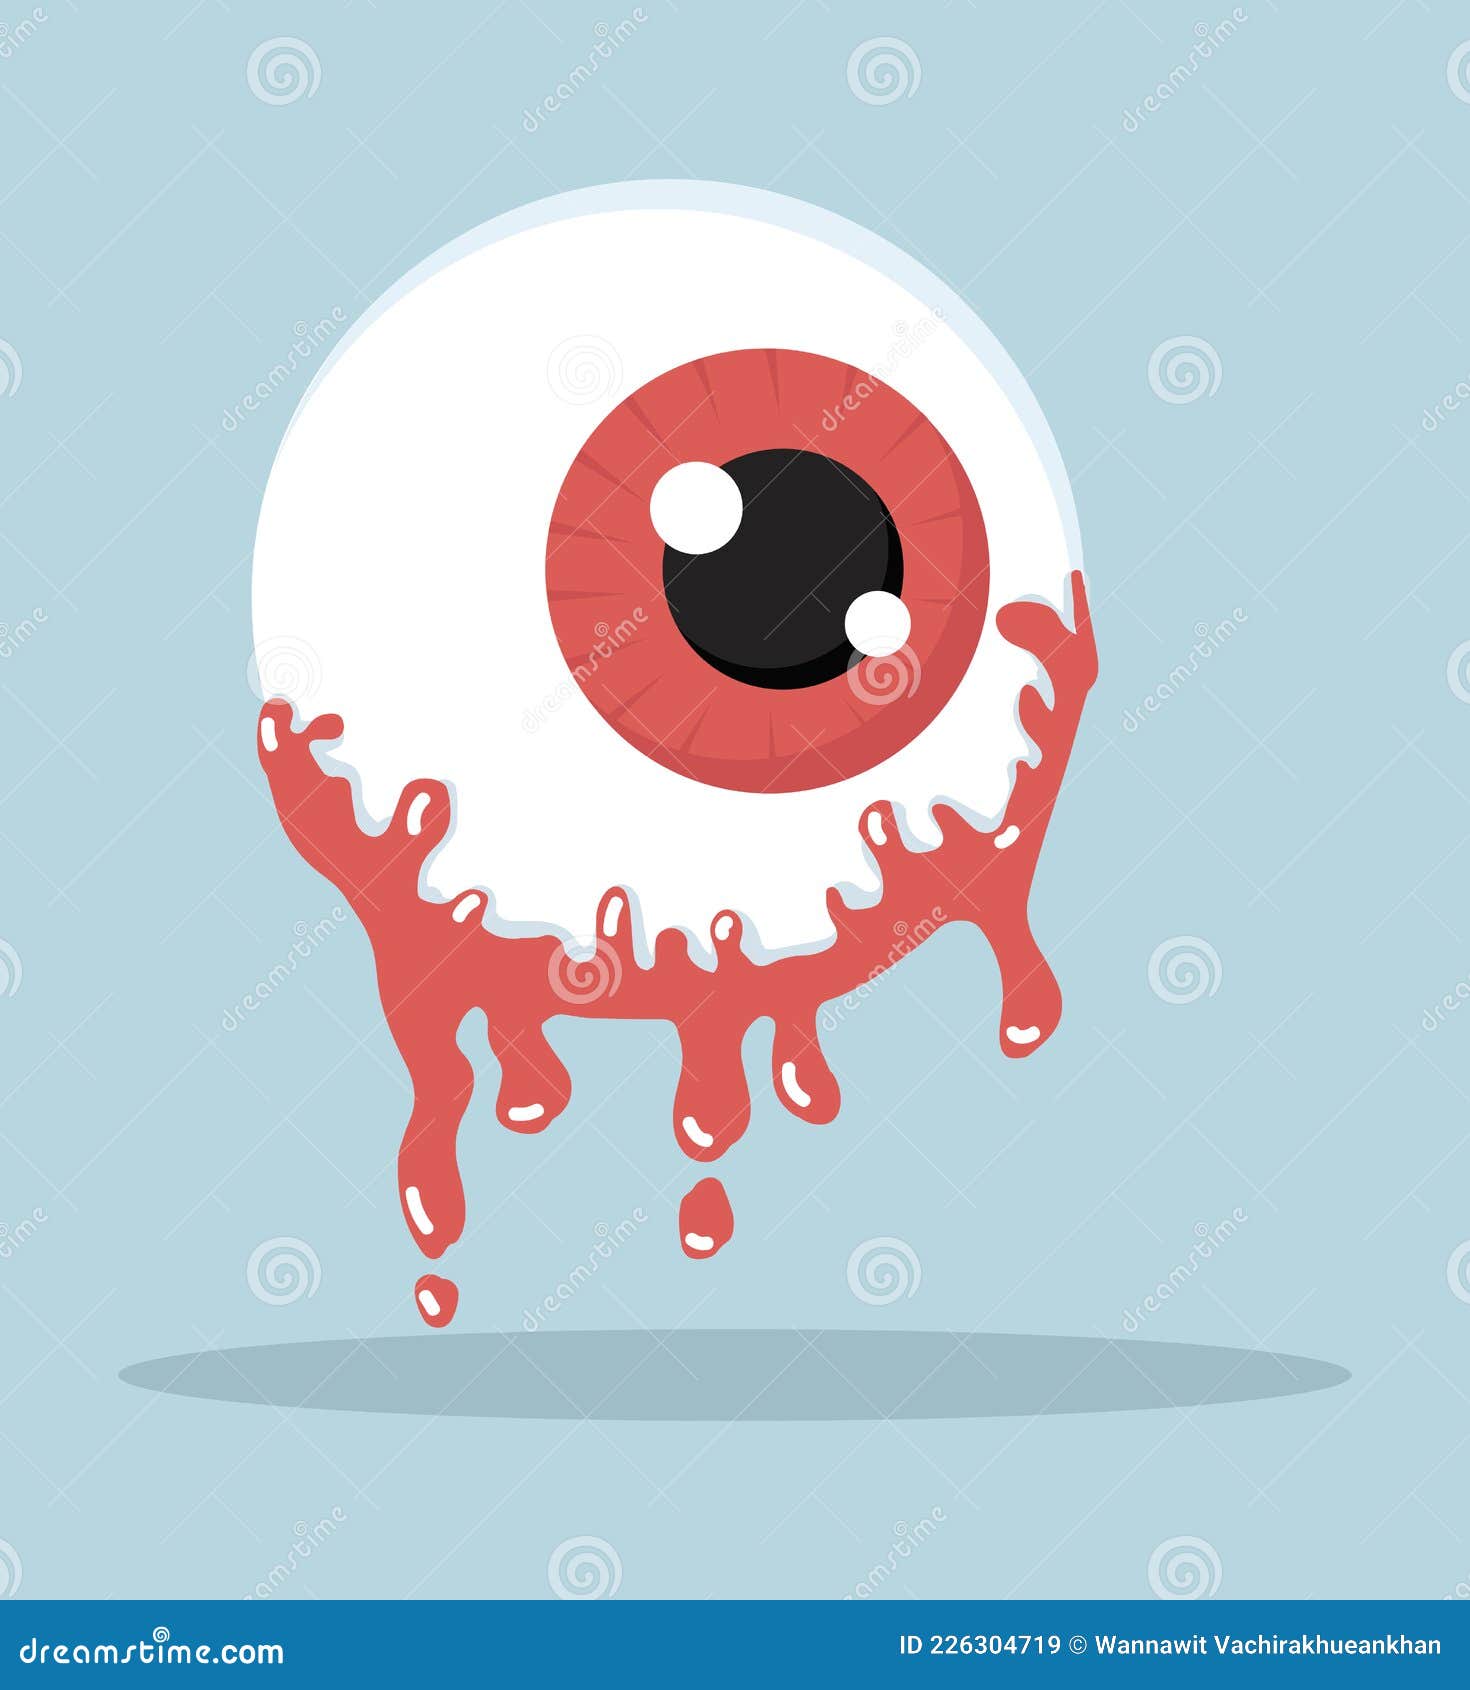 Human Red Eye Ball Vector Isolated Stock Vector - Illustration of care ...